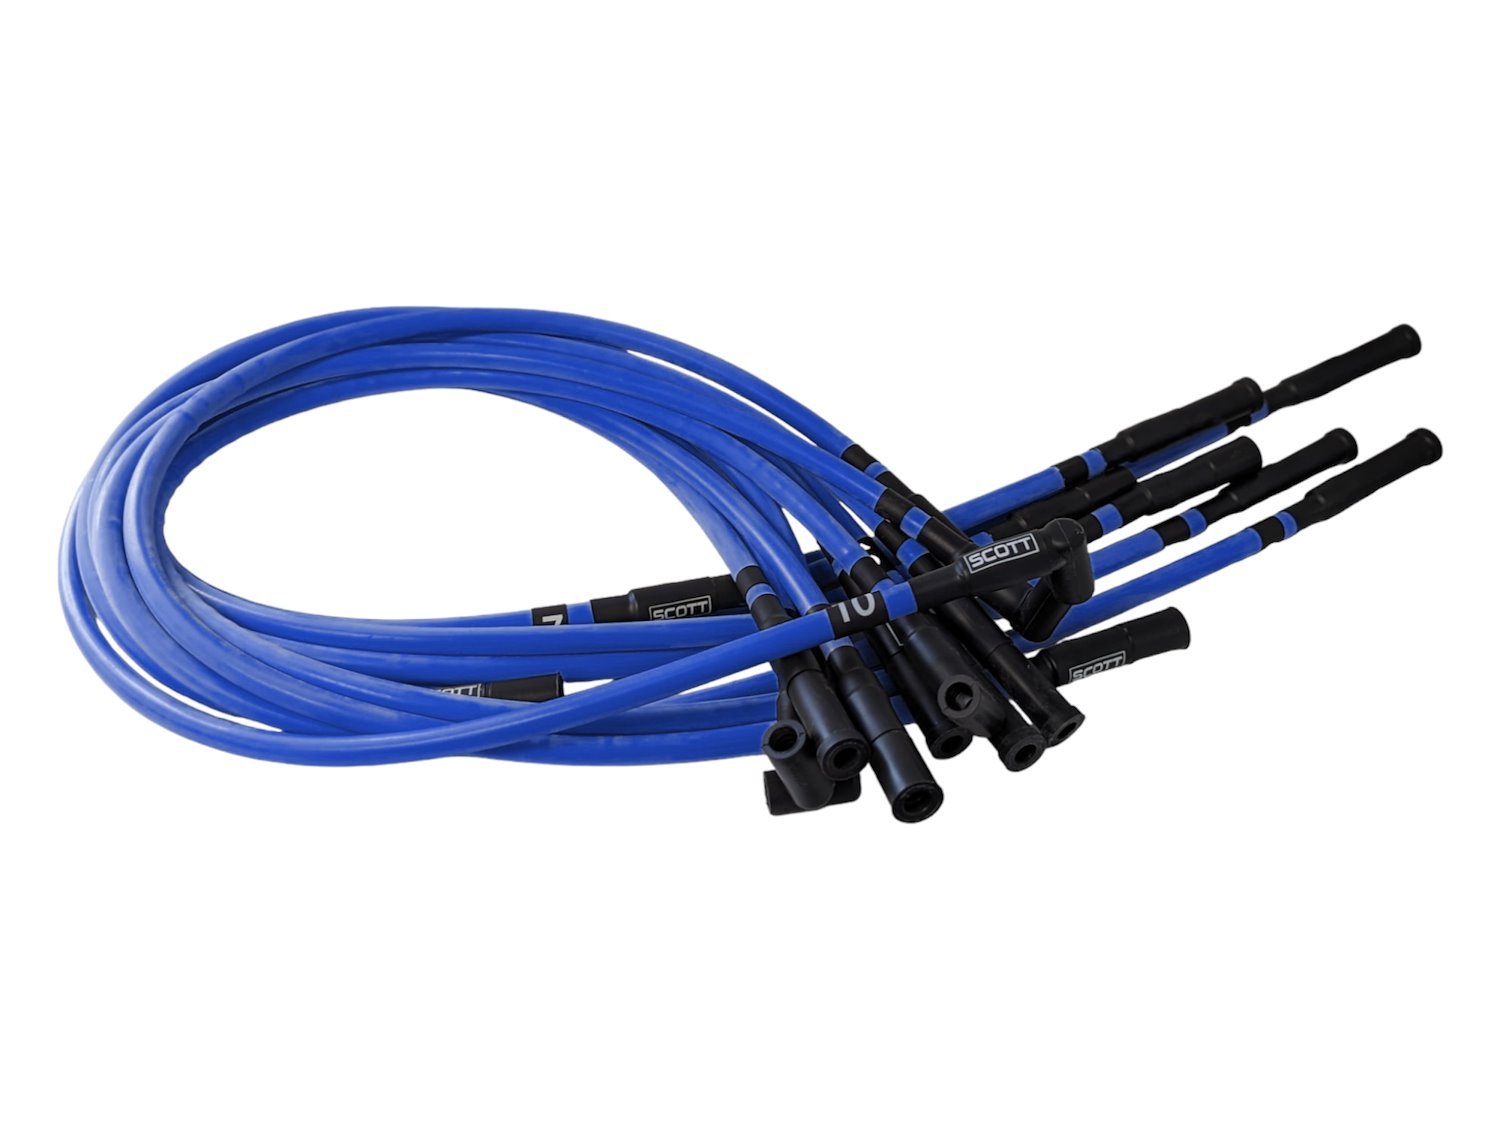 SPW-CH-690-III-4 High-Performance Silicone-Sleeved Spark Plug Wire Set for Dodge Viper (Gen-3) [Blue]